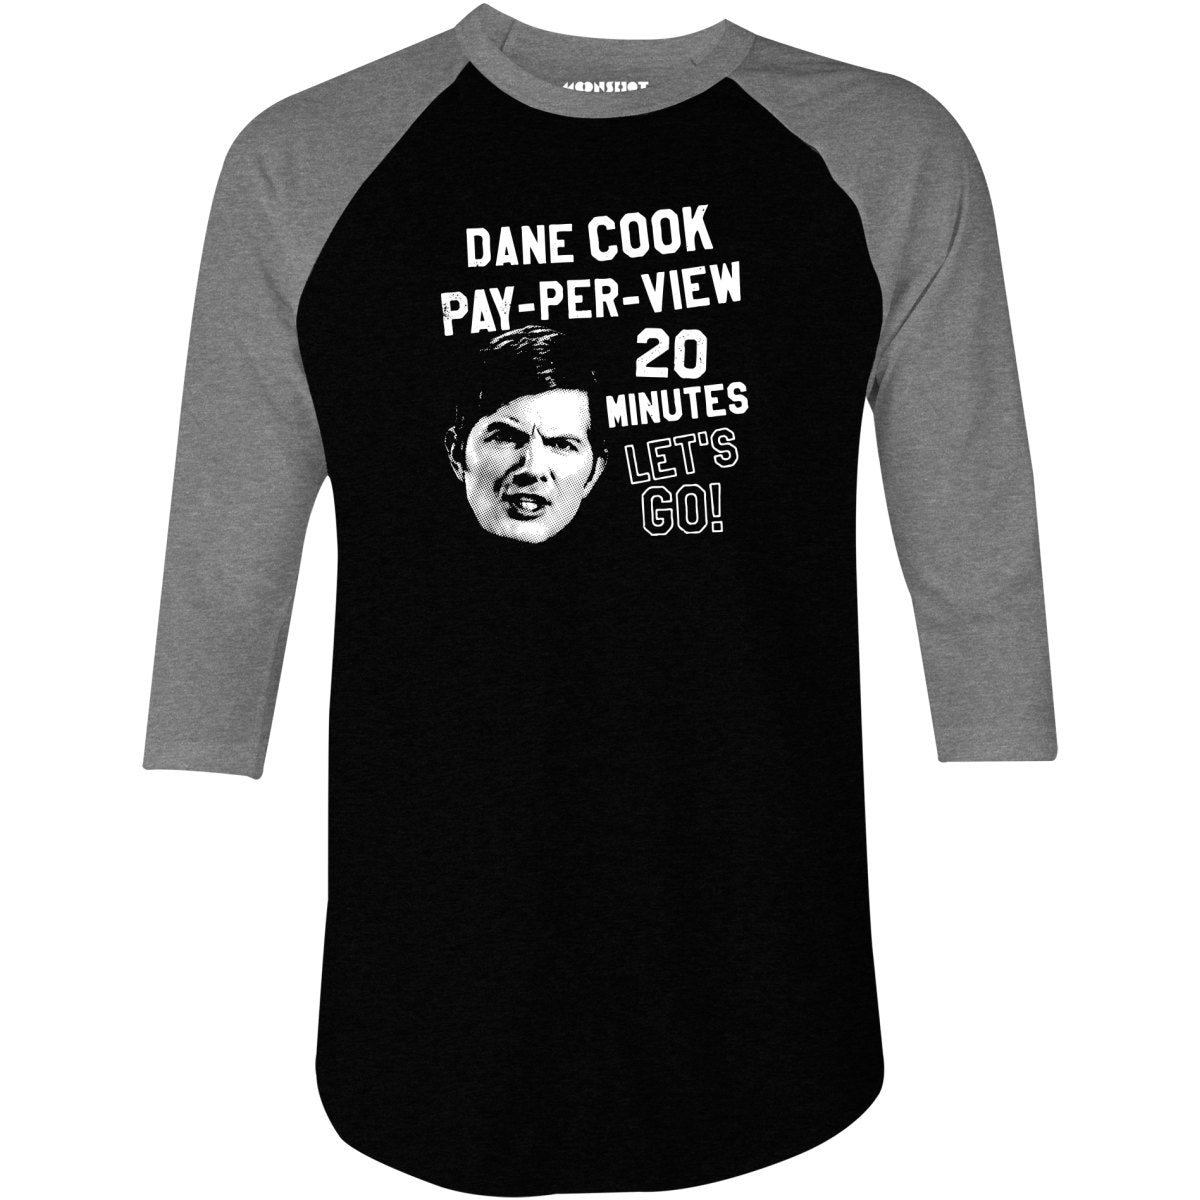 Dane Cook Pay-Per-View 20 Minutes Let's Go - 3/4 Sleeve Raglan T-Shirt